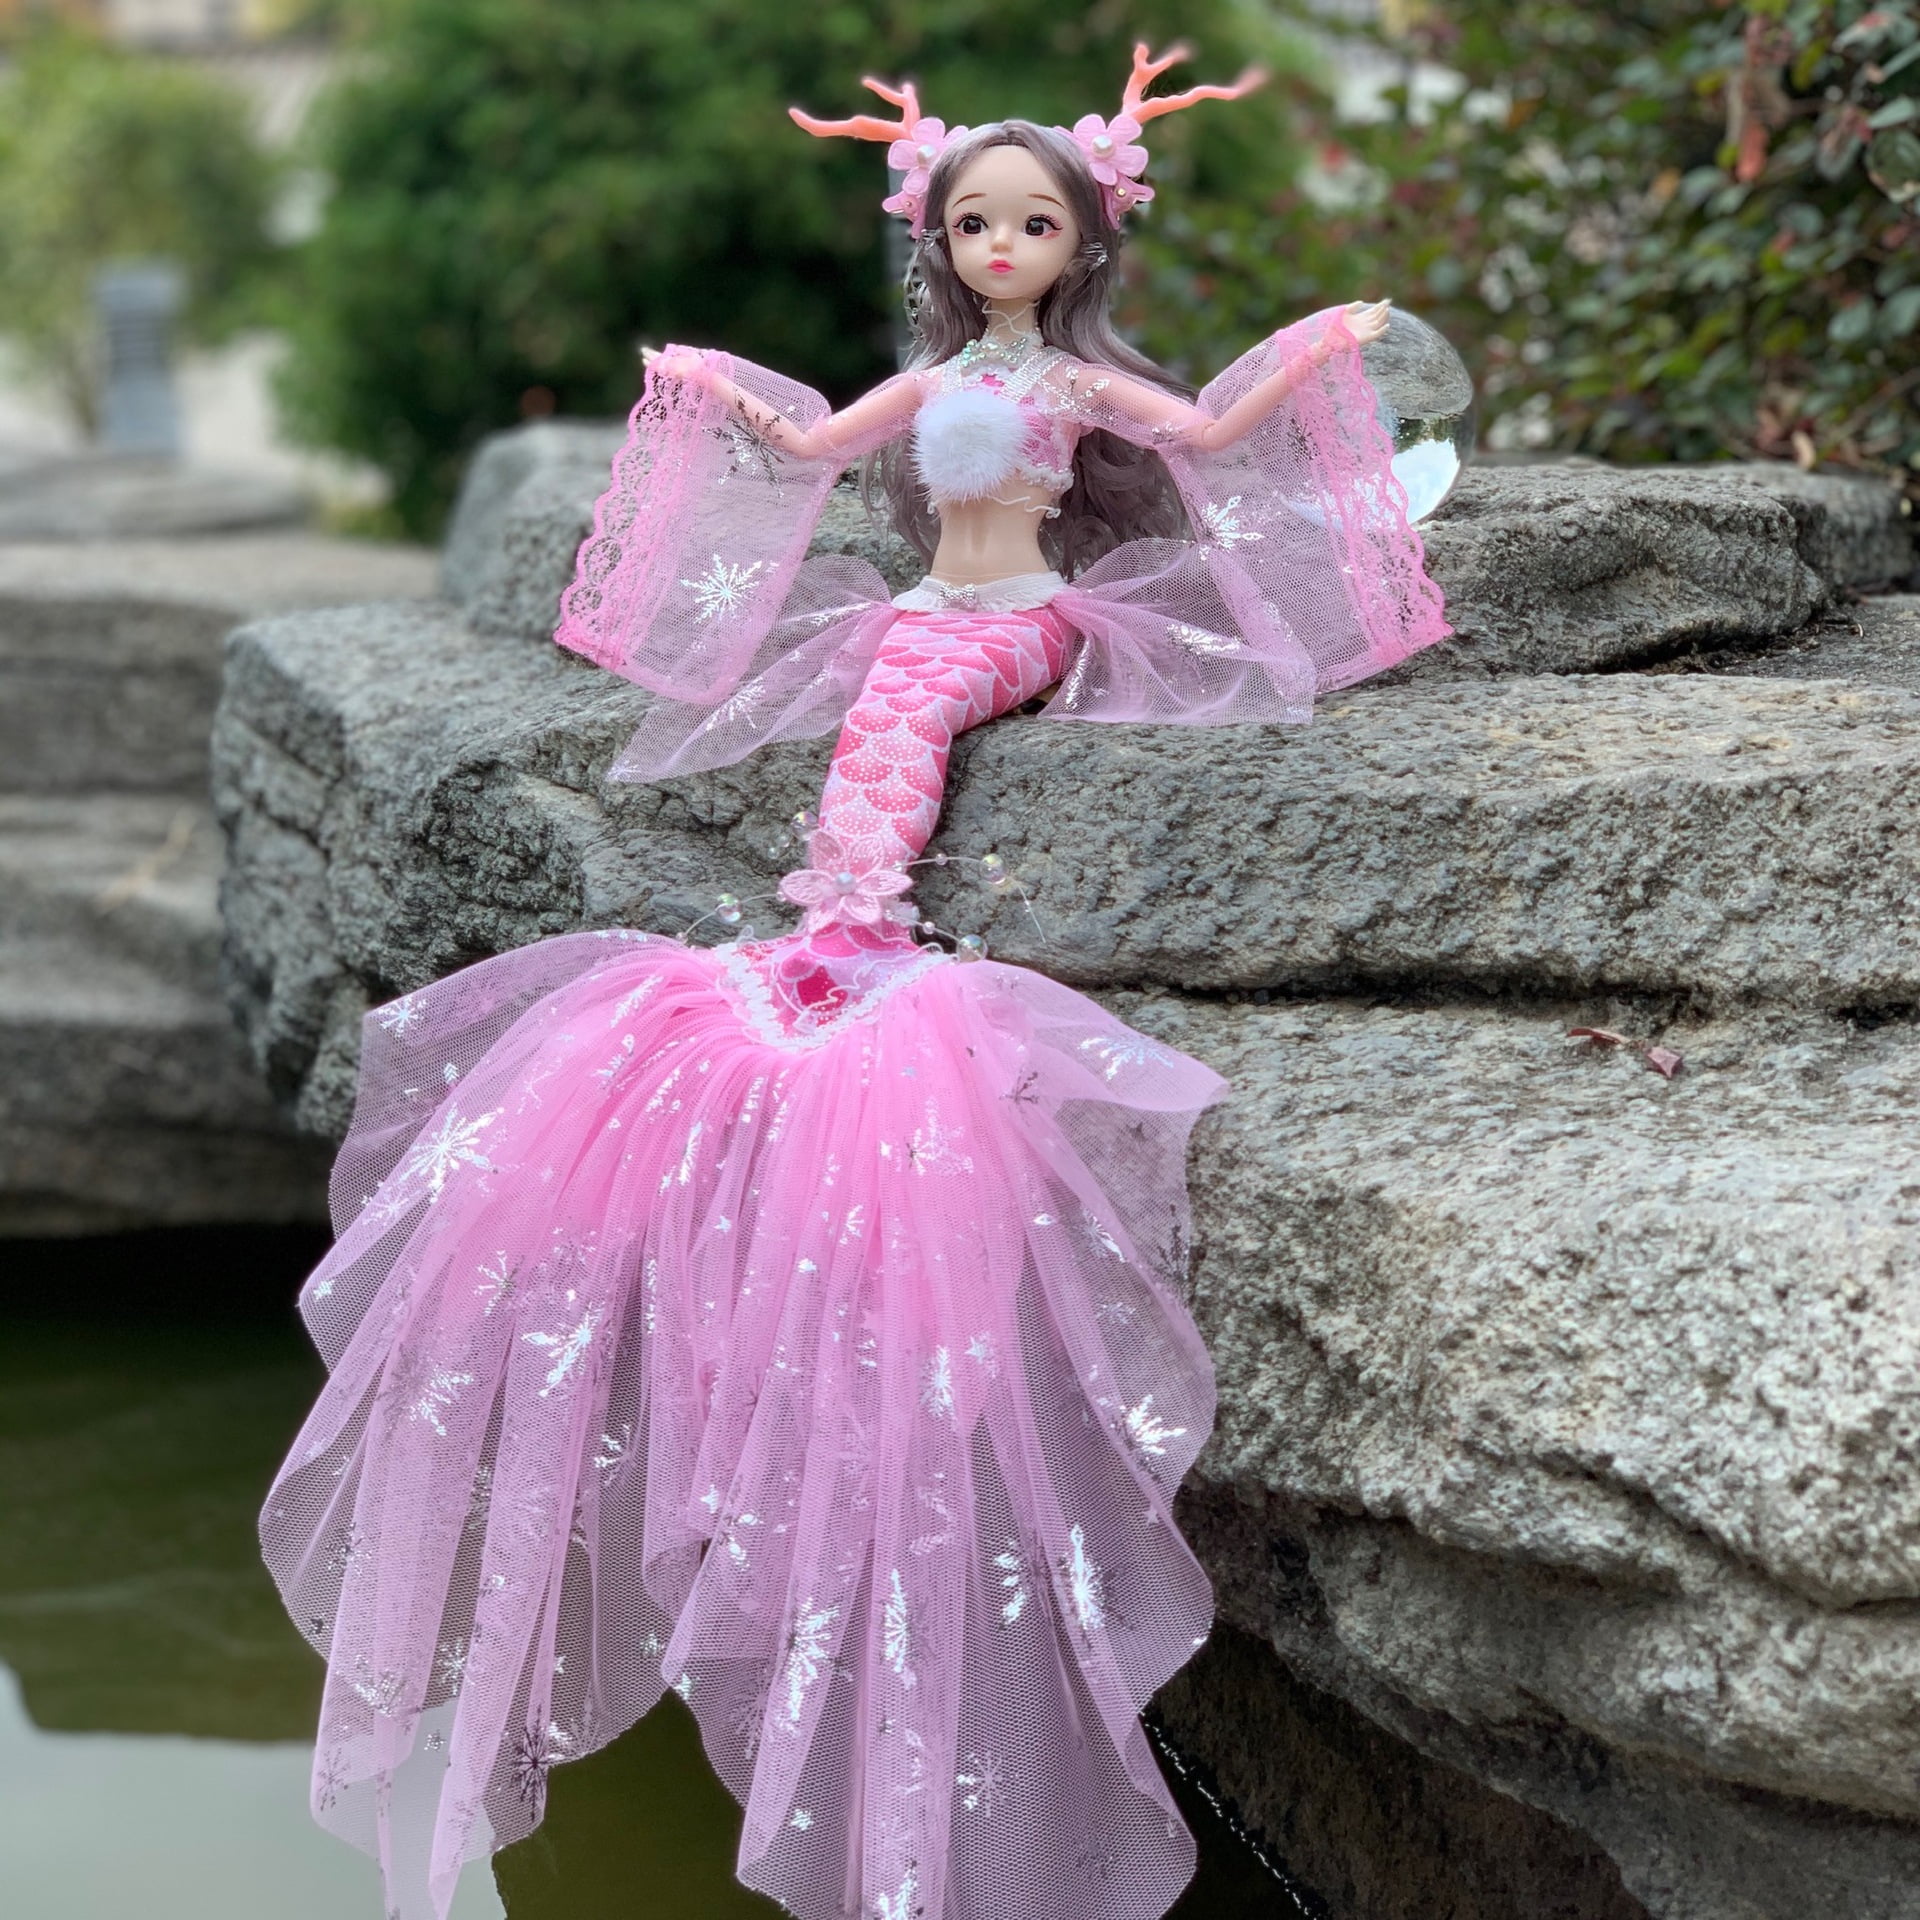 45cm Bjd Doll 13 Joint Movable Mermaid Doll 3D Eye Fairy Tale Outfit For Barbie Toy Gift for Girls，Pink - Walmart.com